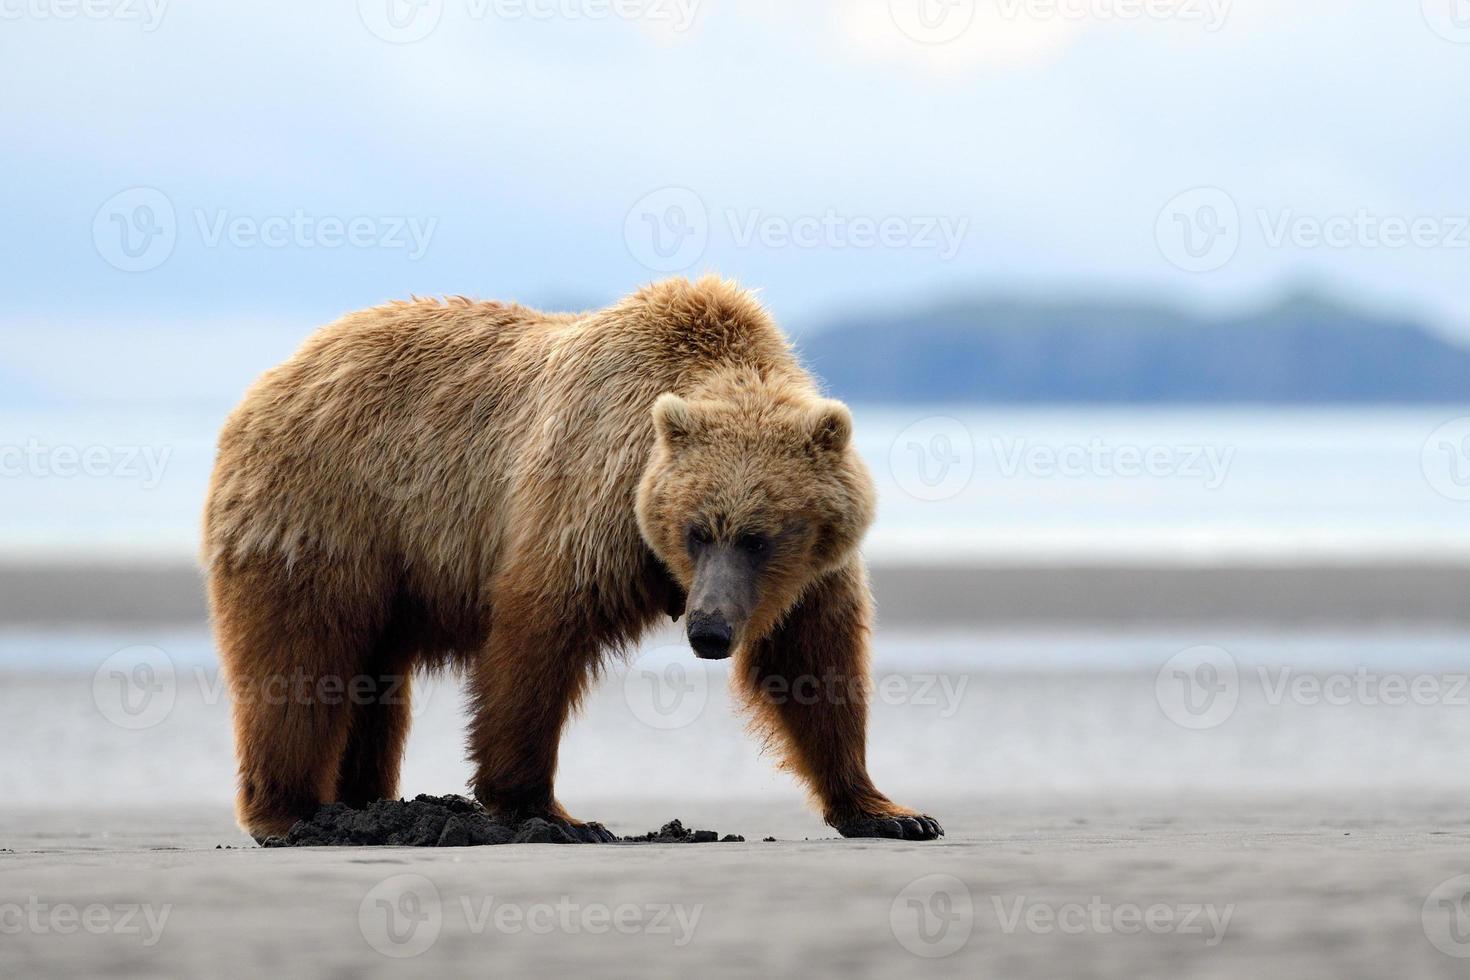 Grizzly beer foto